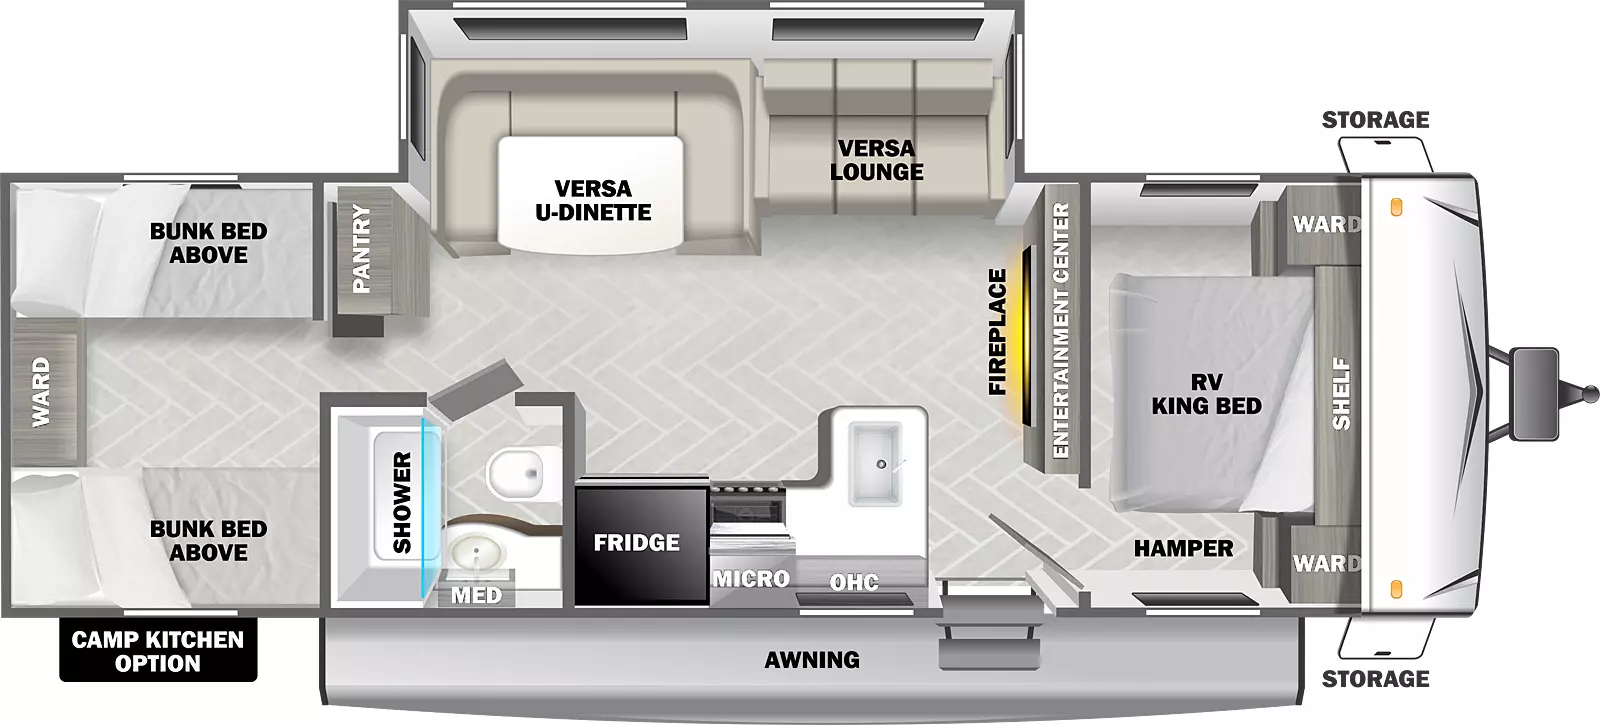 The T2990 has one slideout and one entry. Exterior features front storage, awning, and a camp kitchen option. Interior layout front to back: RV king bed with shelf above and wardrobes on each side, and door side hamper; entertainment center with fireplace below along inner wall; off-door side slideout with versa lounge and versa u-dinette, and pantry; door side entry, peninsula kitchen counter with sink, overhead cabinet, microwave, cooktop, and refrigerator; door side full bathroom with medicine cabinet; rear bunk room with bunks on each side and rear wardrobe.